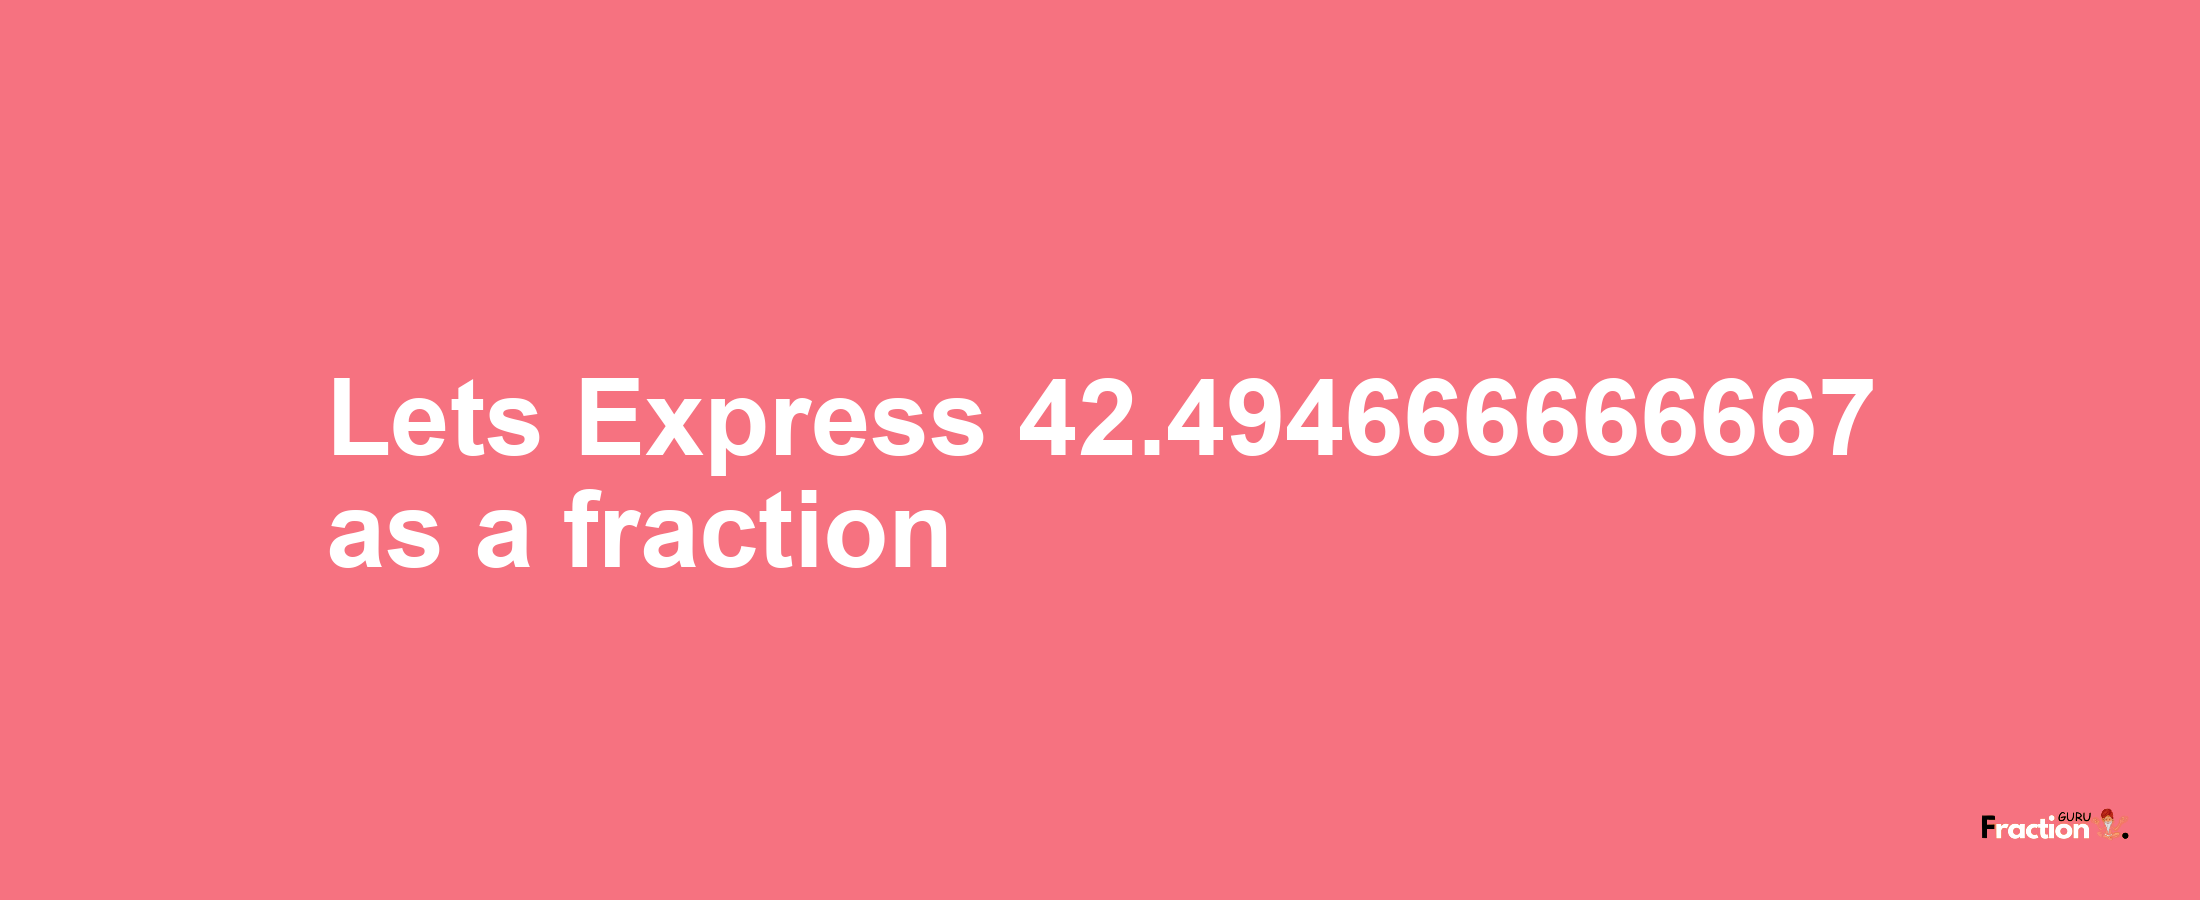 Lets Express 42.494666666667 as afraction